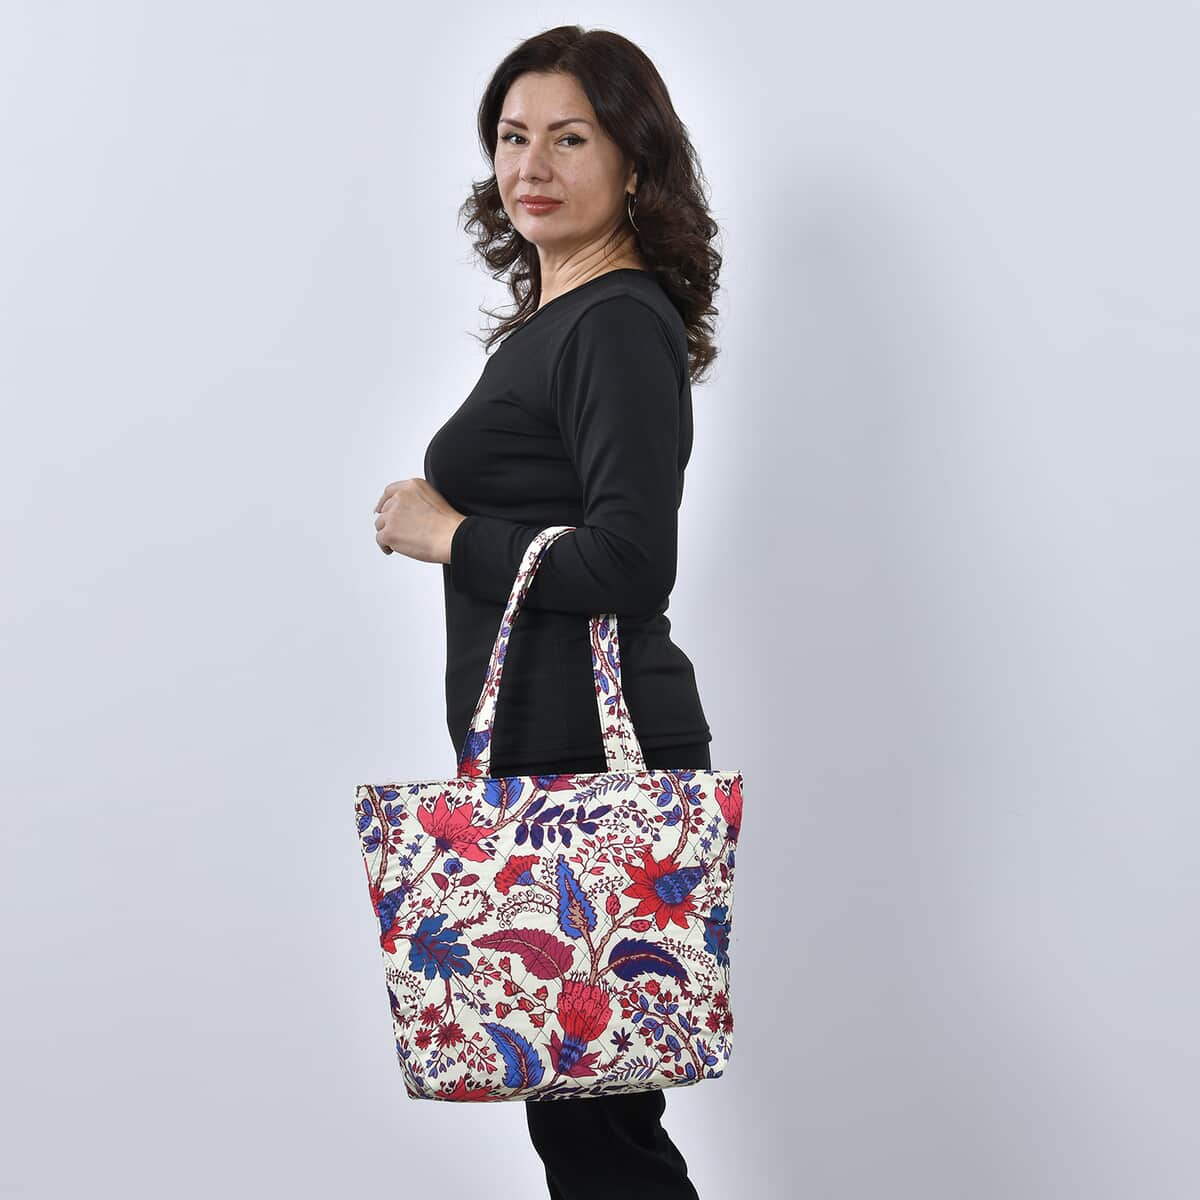 Beige and Mulit Color Flower Pattern Tote Bag (17"x4.5"x13.5") image number 1